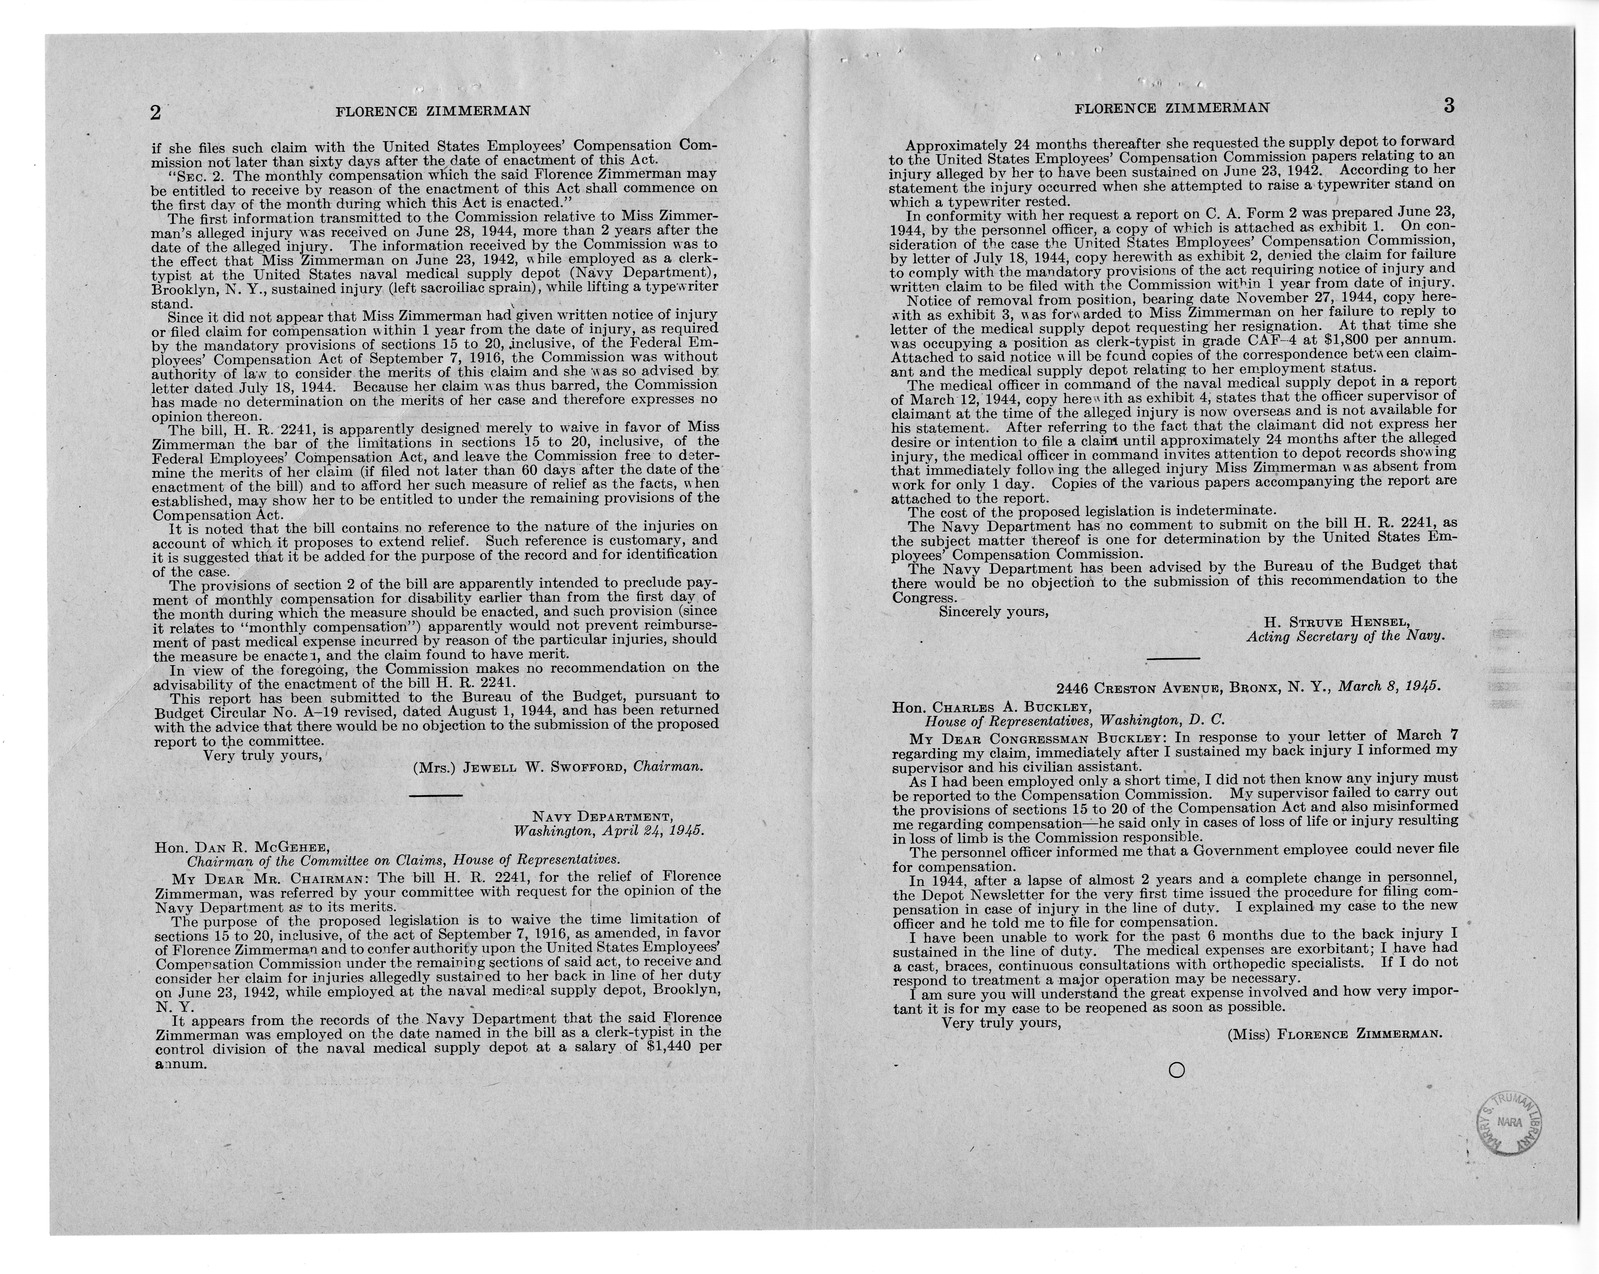 Memorandum from Frederick J. Bailey to M. C. Latta, H.R. 2241, For the Relief of Florence Zimmerman, with Attachments